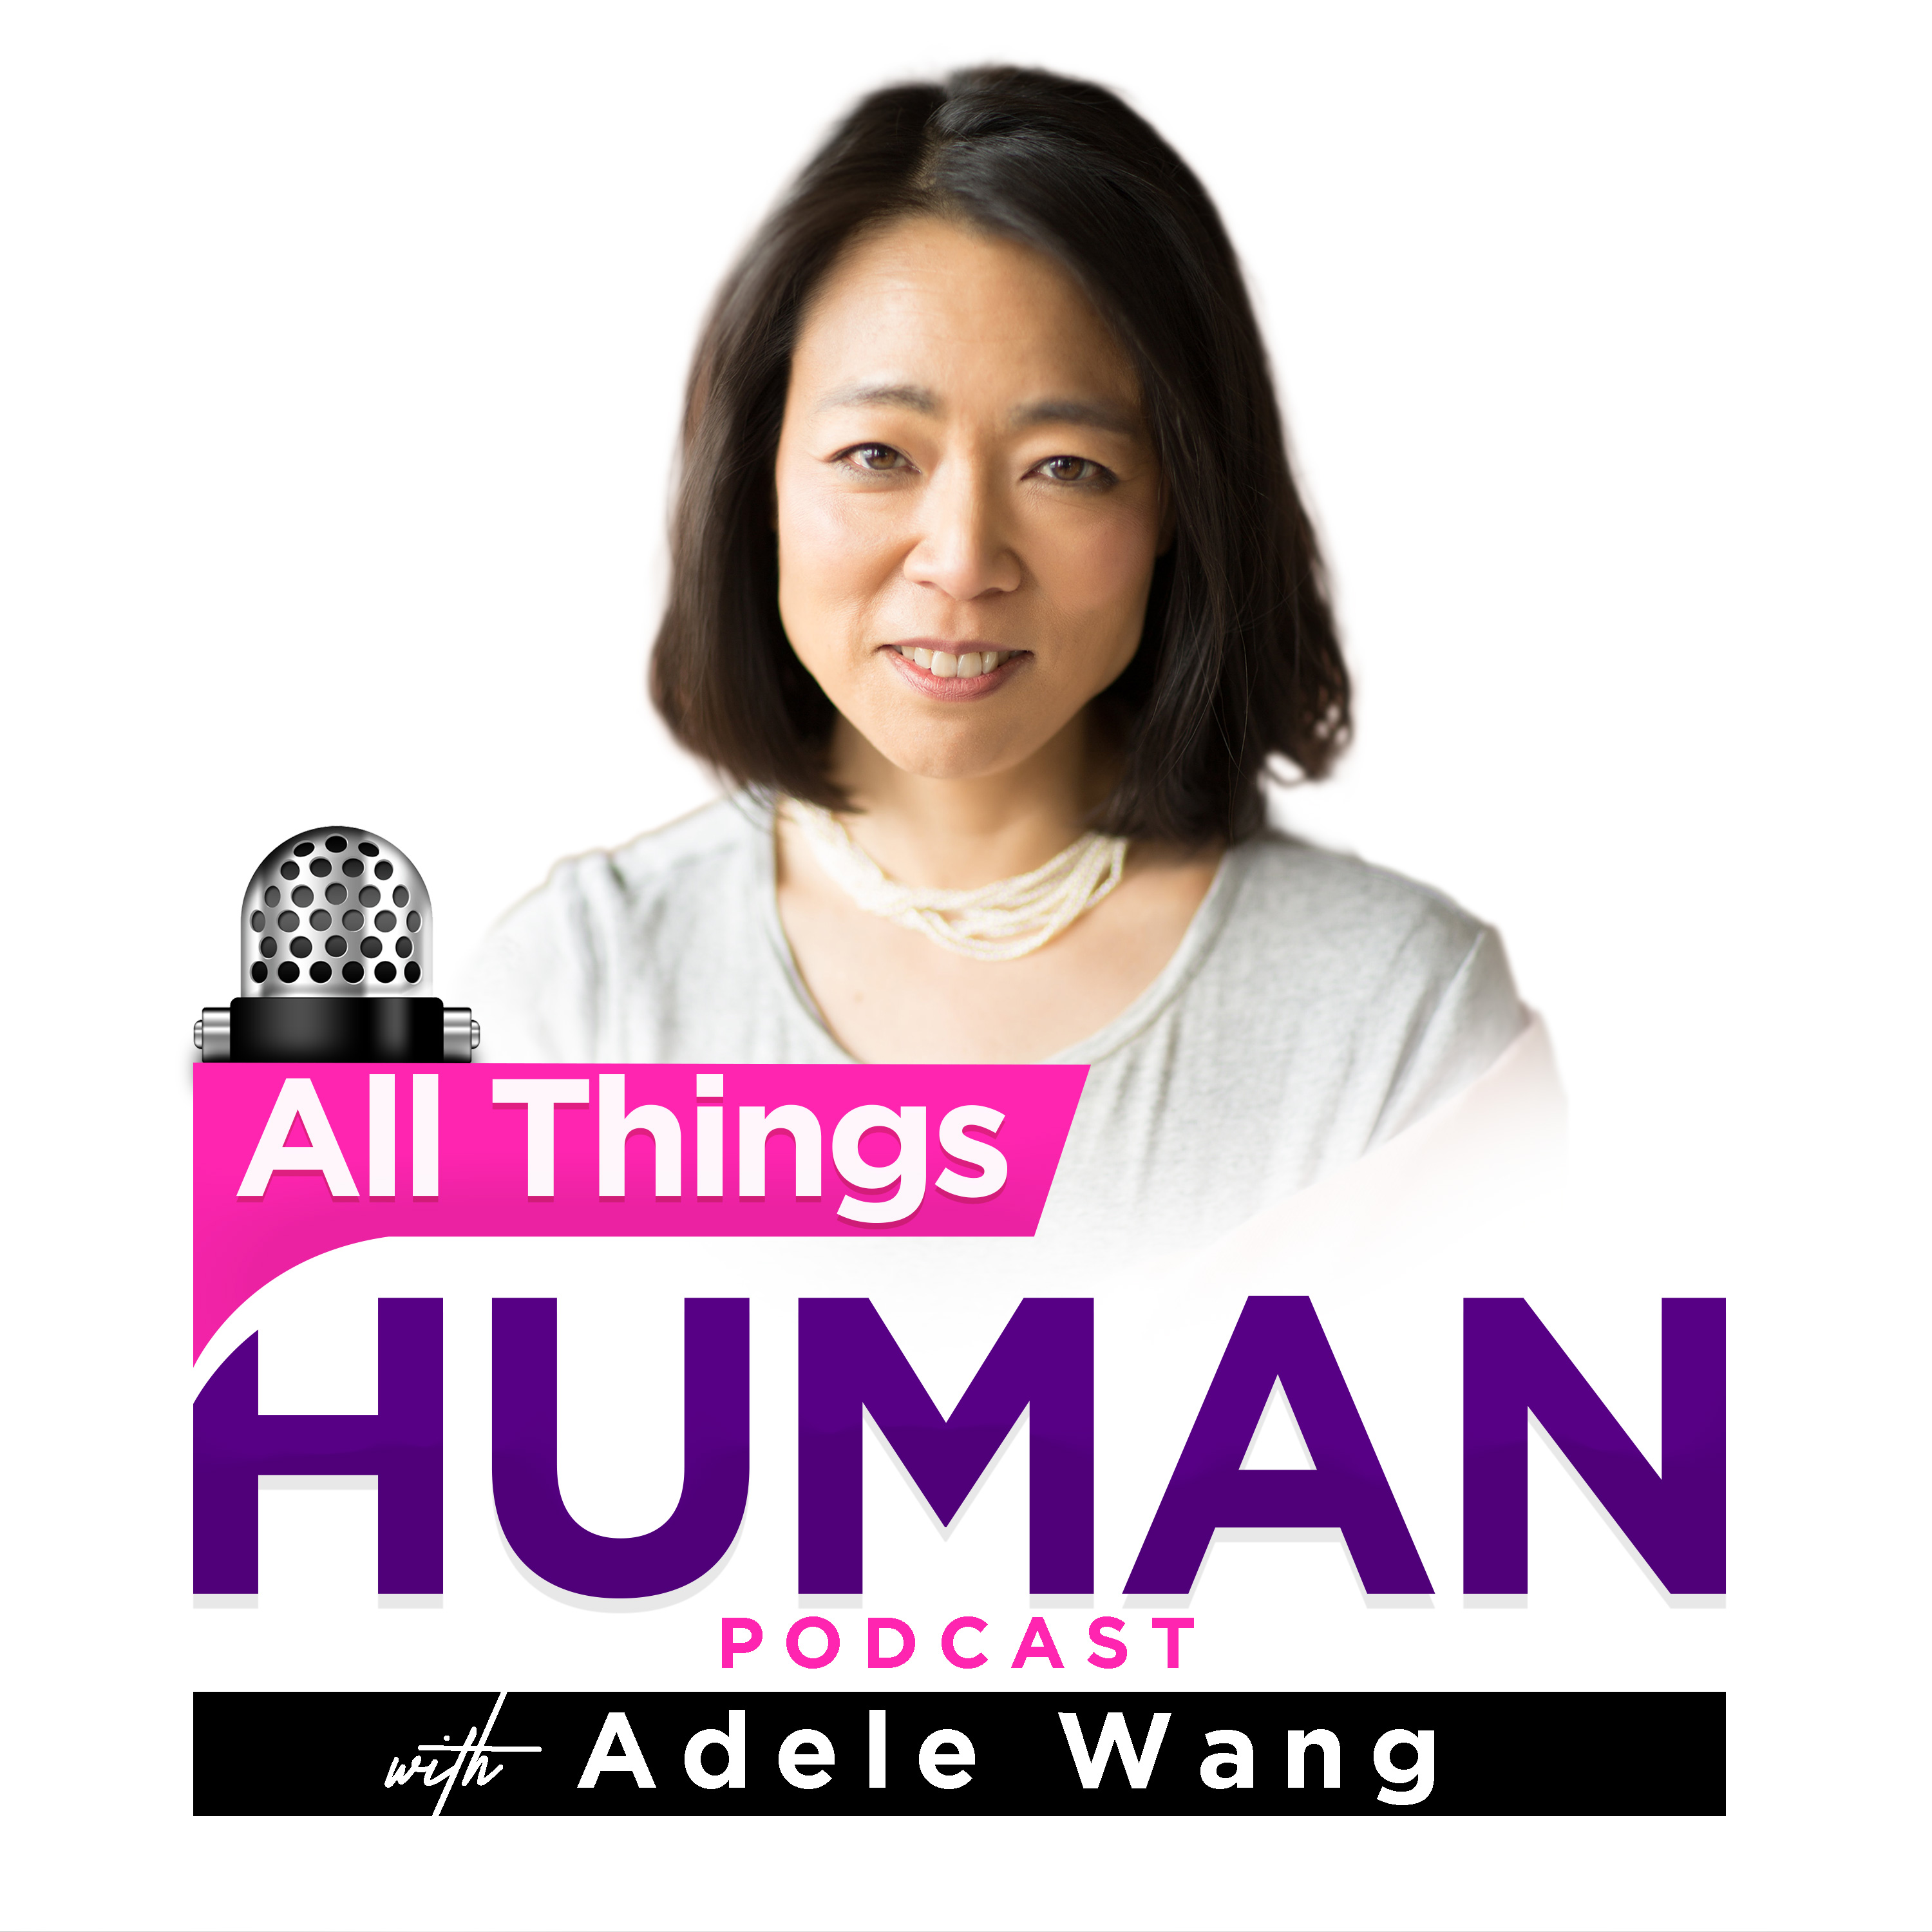 All Things Human with Adele Wang